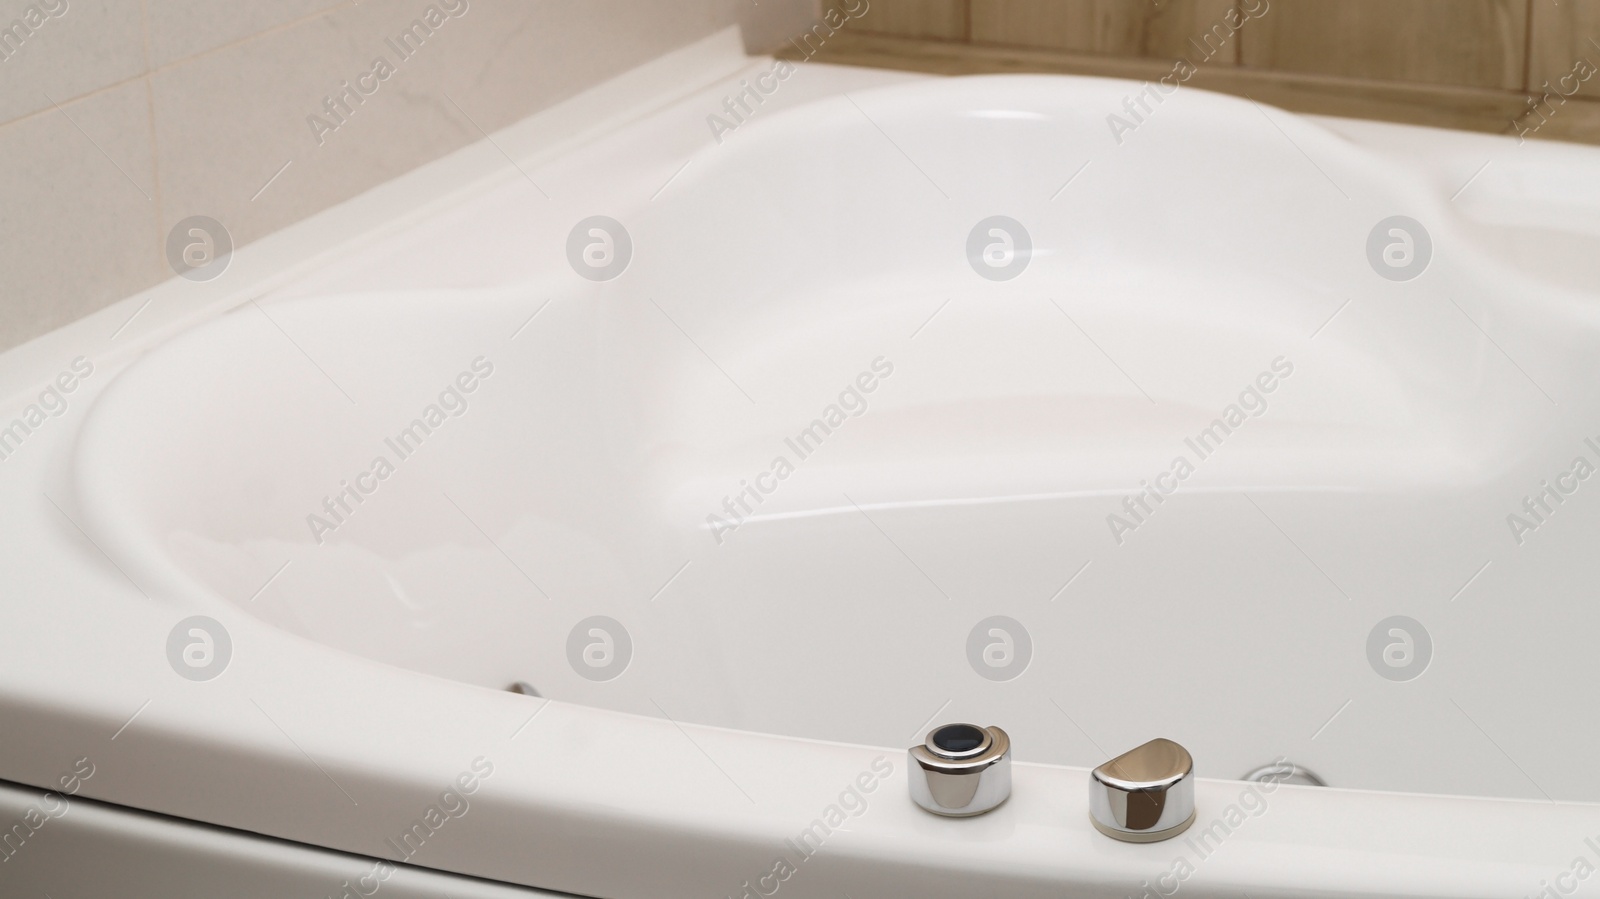 Photo of Closeup view of hot tub with buttons indoors